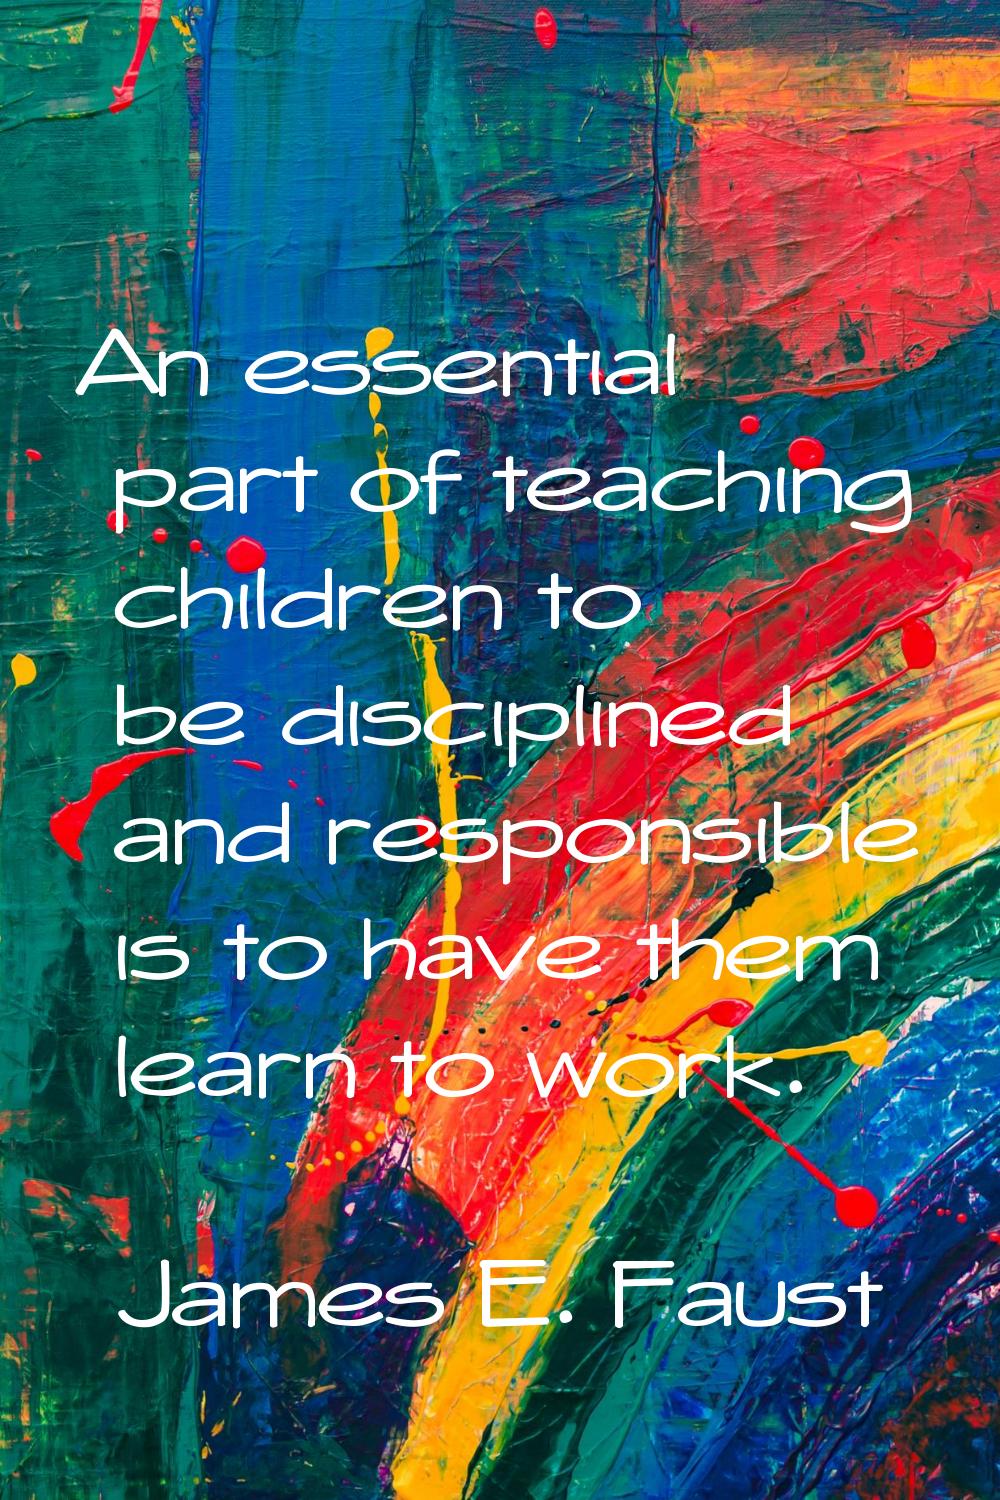 An essential part of teaching children to be disciplined and responsible is to have them learn to w